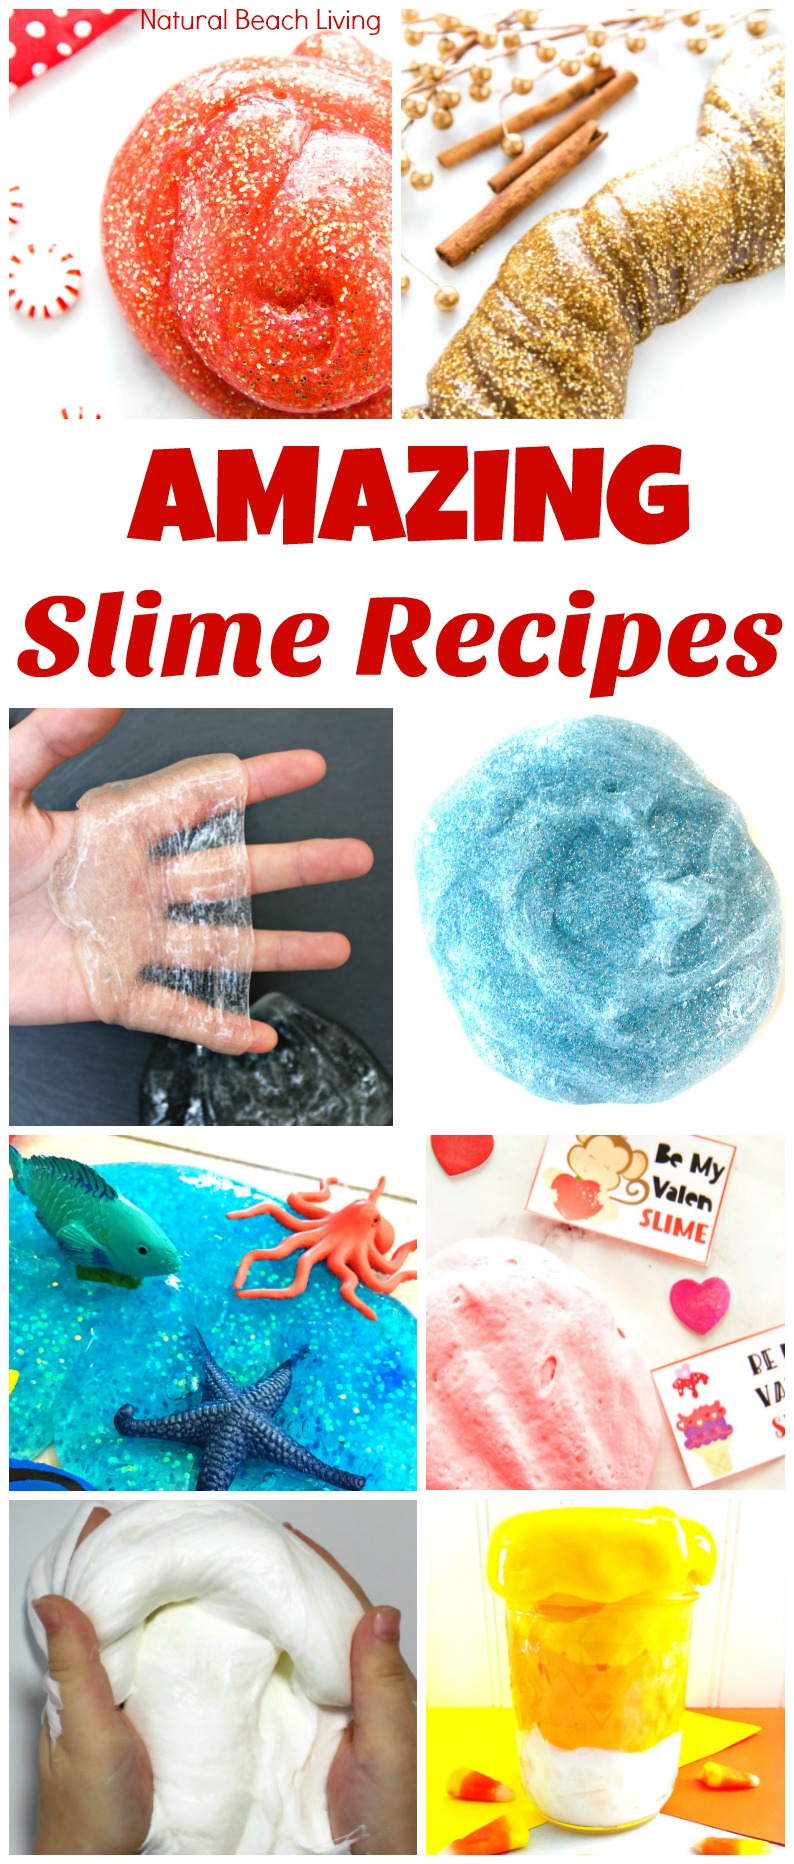 How to Make Easy Clear Slime Recipe, The Best Clear Slime Recipe, Clear Slime with No Air Bubbles, DIY Clear Slime, Liquid Glass Slime, How to Make Jiggly Slime, Borax Slime Recipe, Fluffy Slime Recipes, Slime Science for Kids, Saline Slime Recipes #Slimerecipes #slime #clearslime